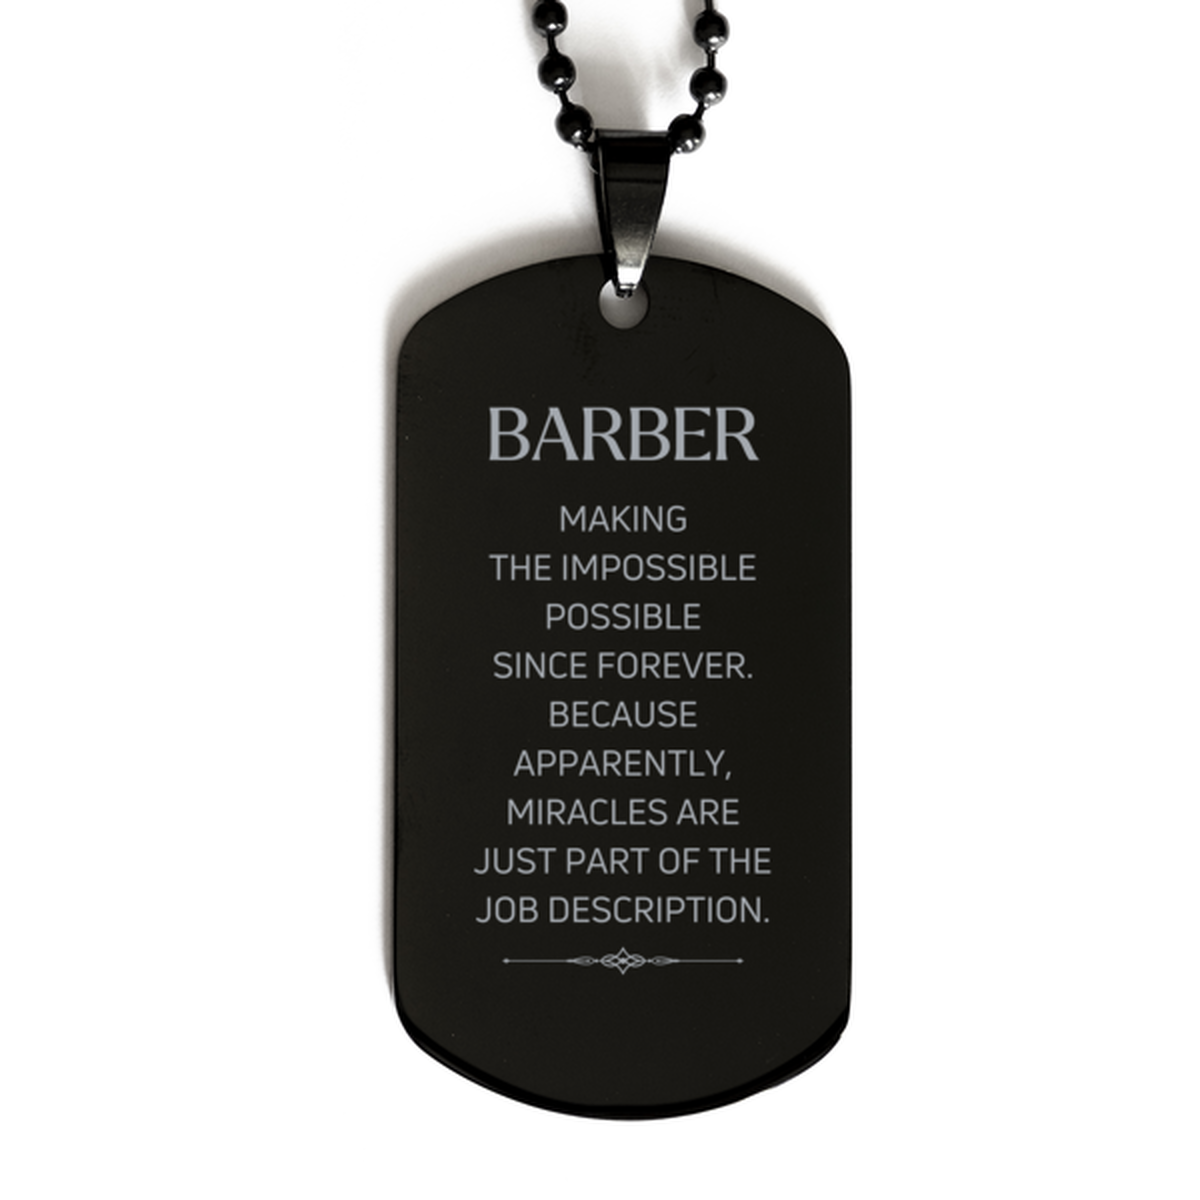 Funny Barber Gifts, Miracles are just part of the job description, Inspirational Birthday Black Dog Tag For Barber, Men, Women, Coworkers, Friends, Boss